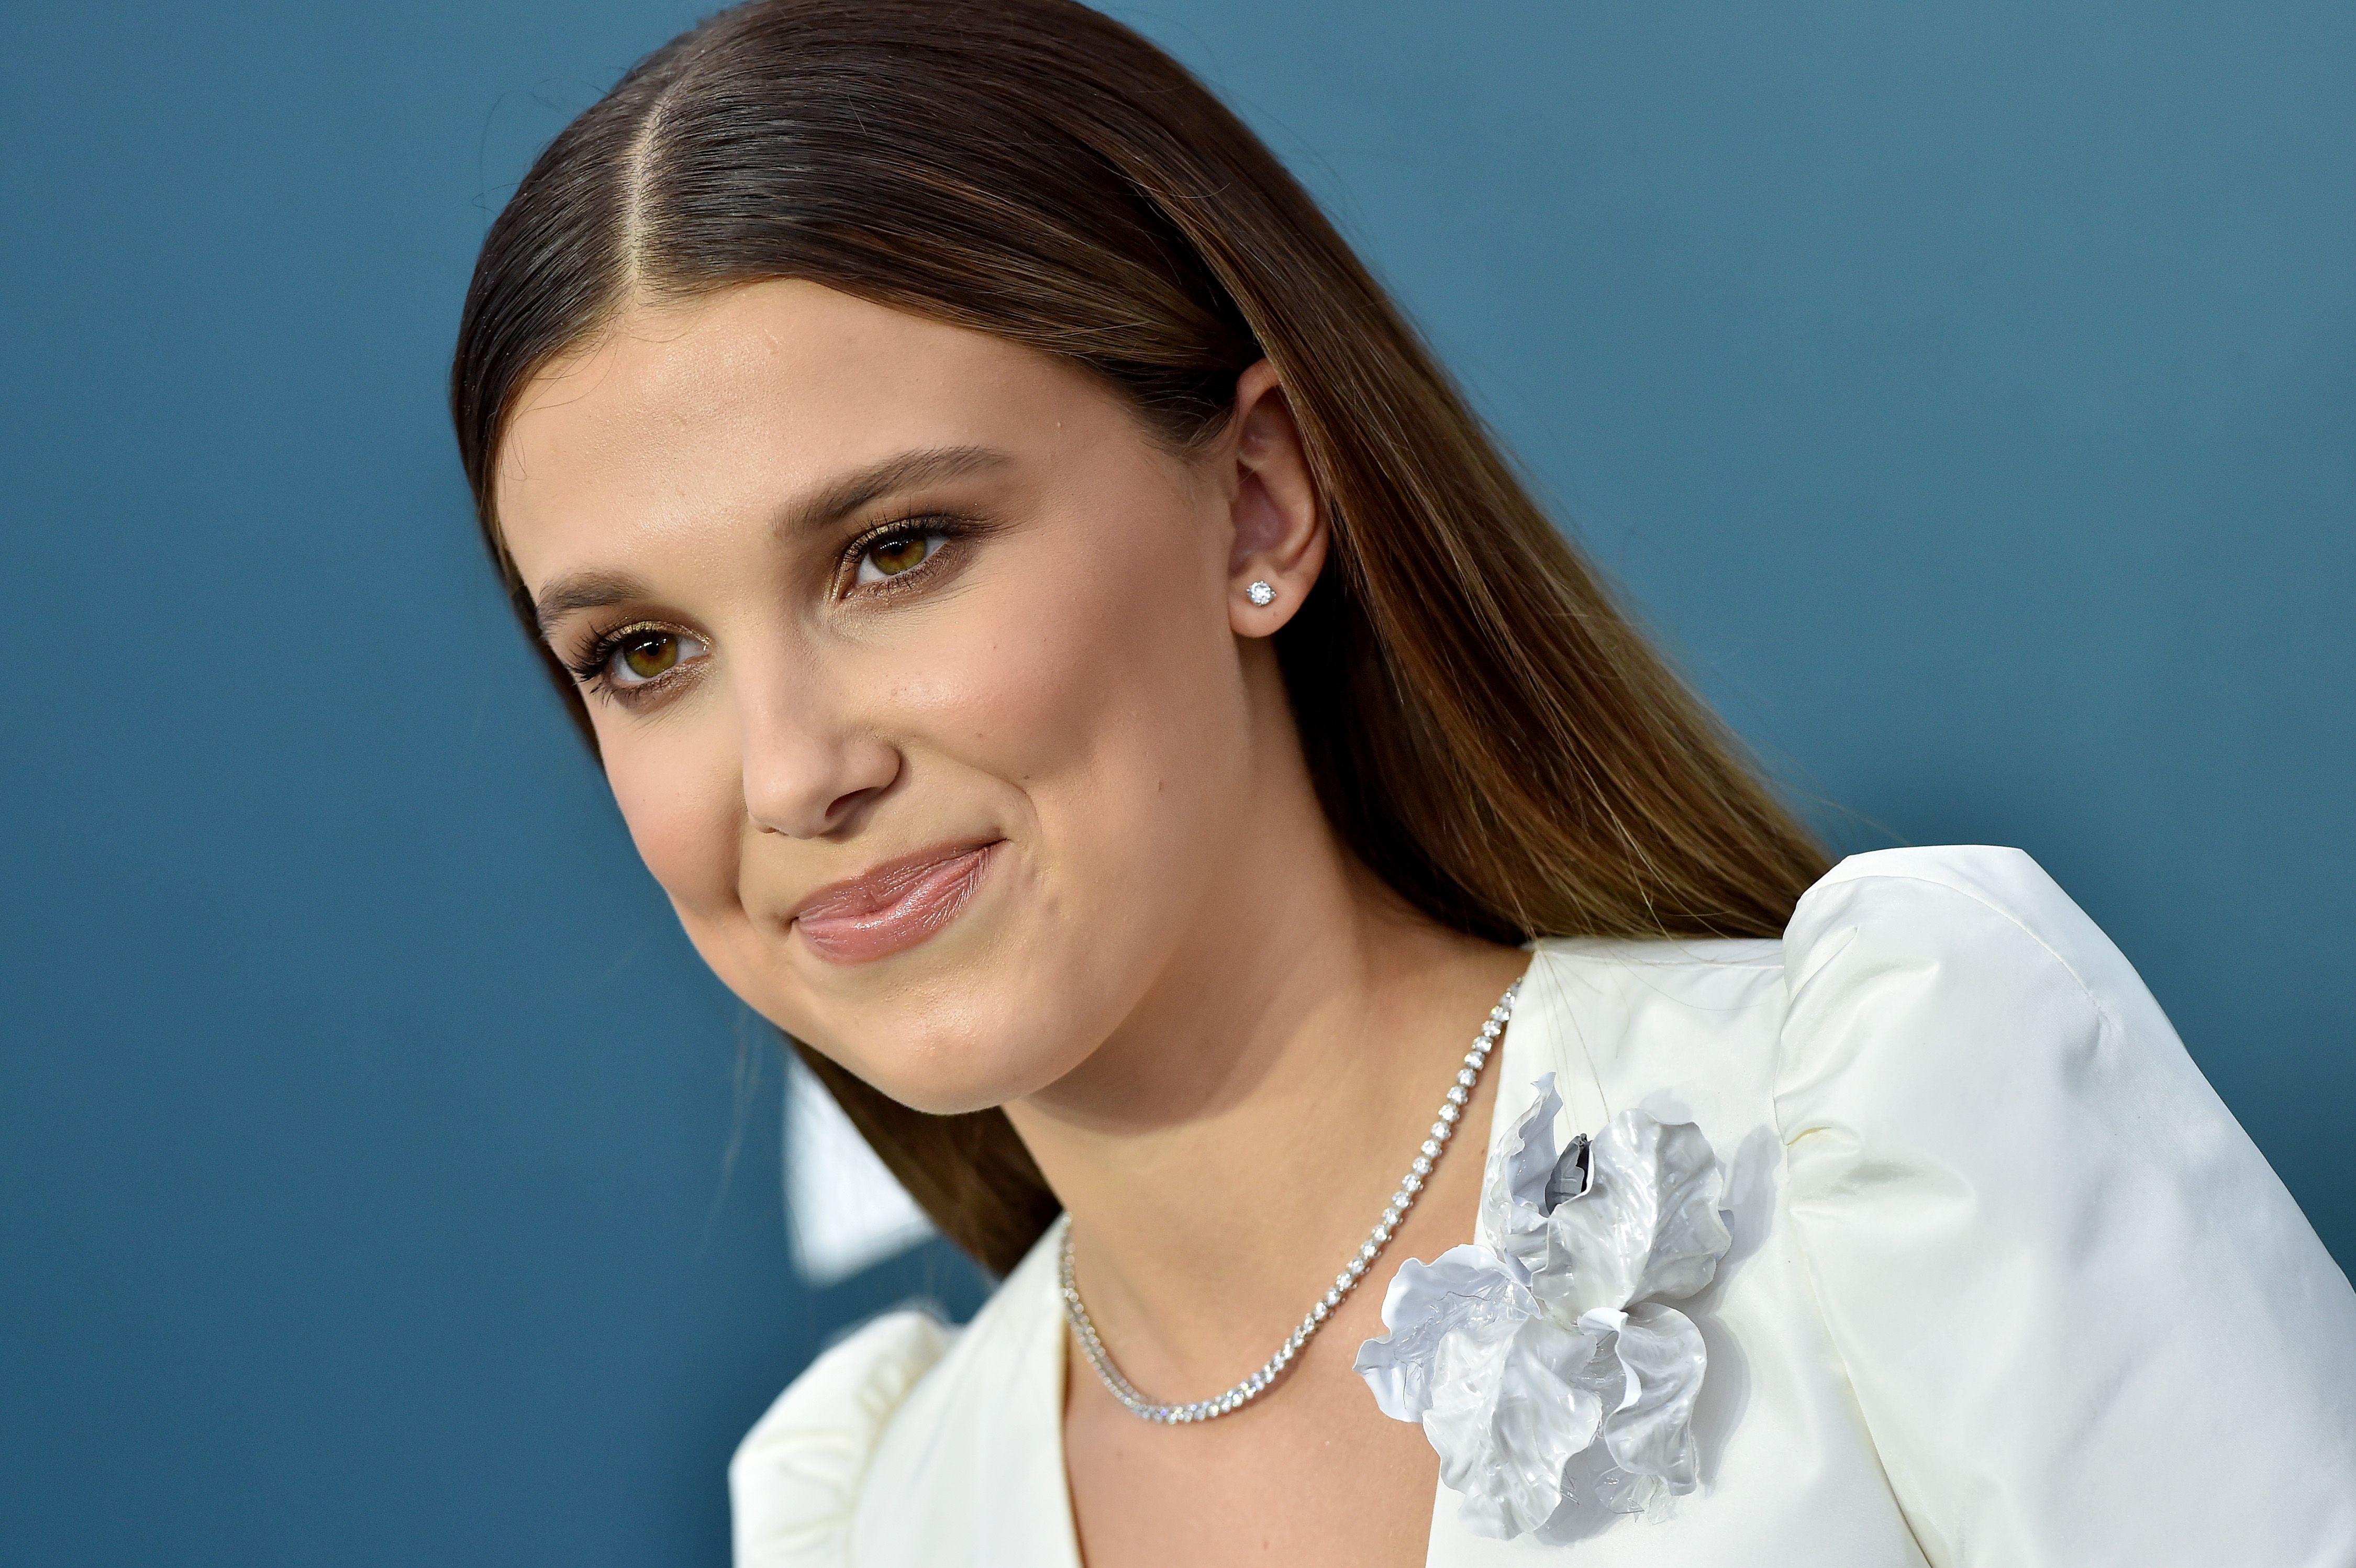 Millie Bobby Brown shows off daring fashion style in a blazer mini